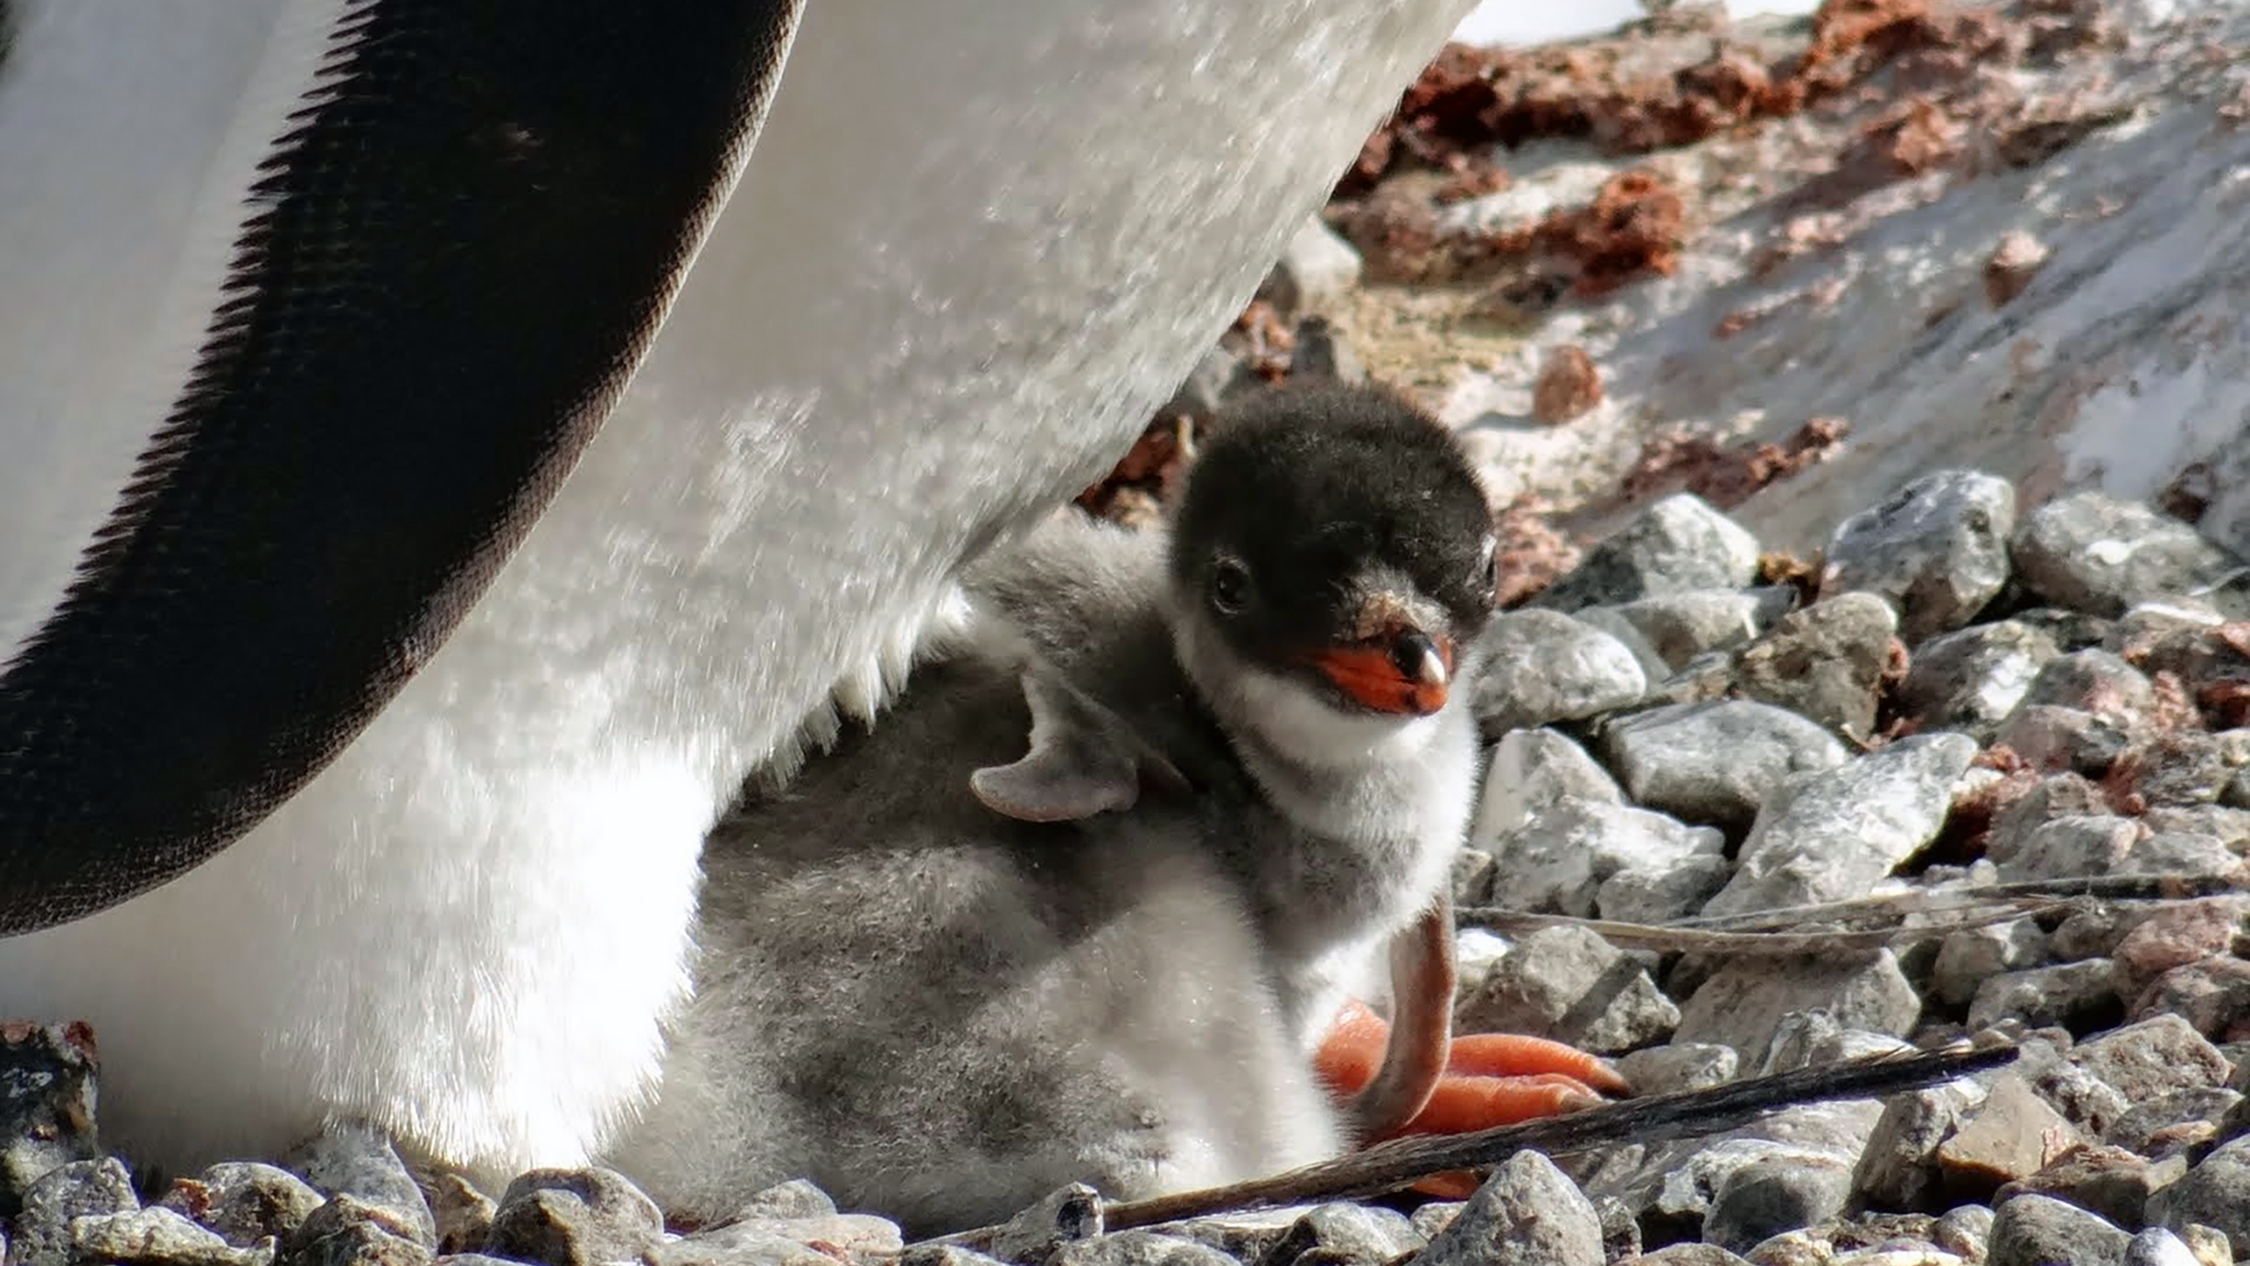 This little gentoo penguin chick was under the strict supervision of its mother in Port Lockroy.